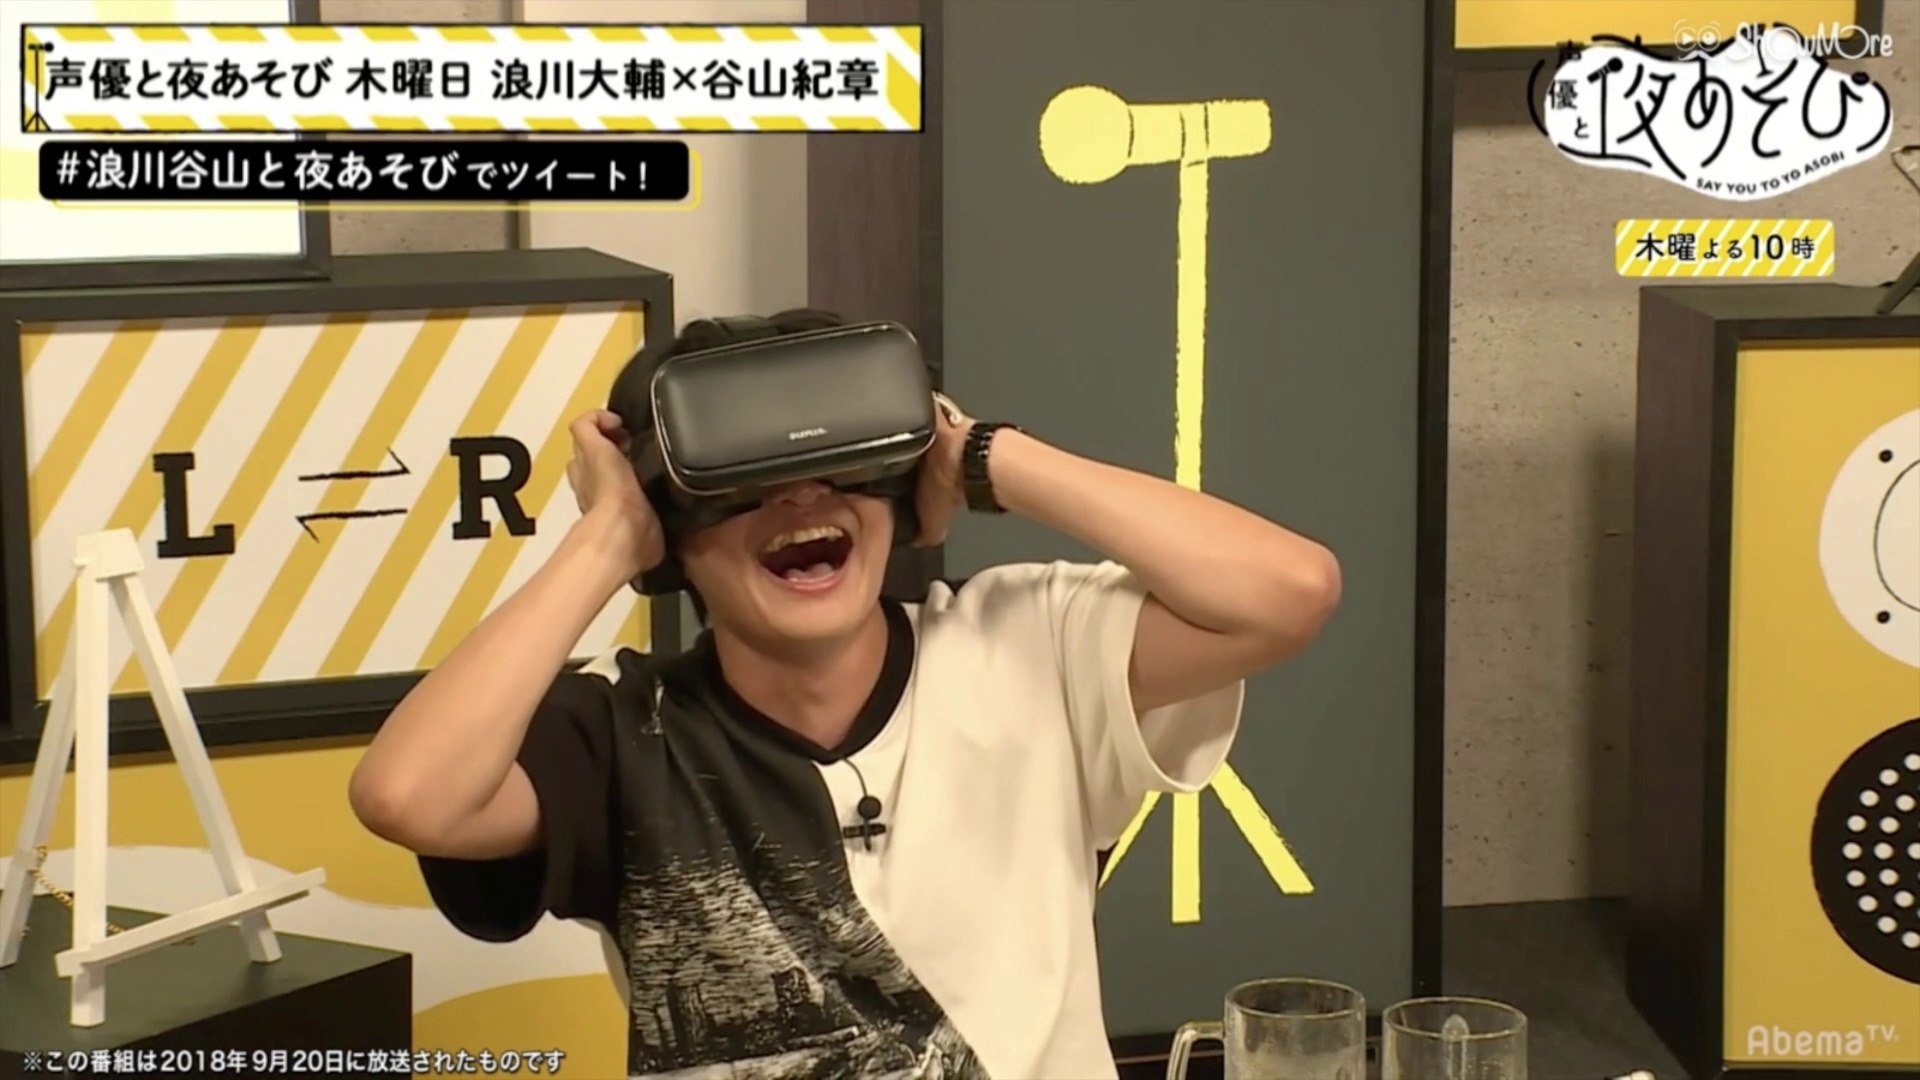 Shimono Hiro watches a VR adult video while everyone else secretly leaves the room